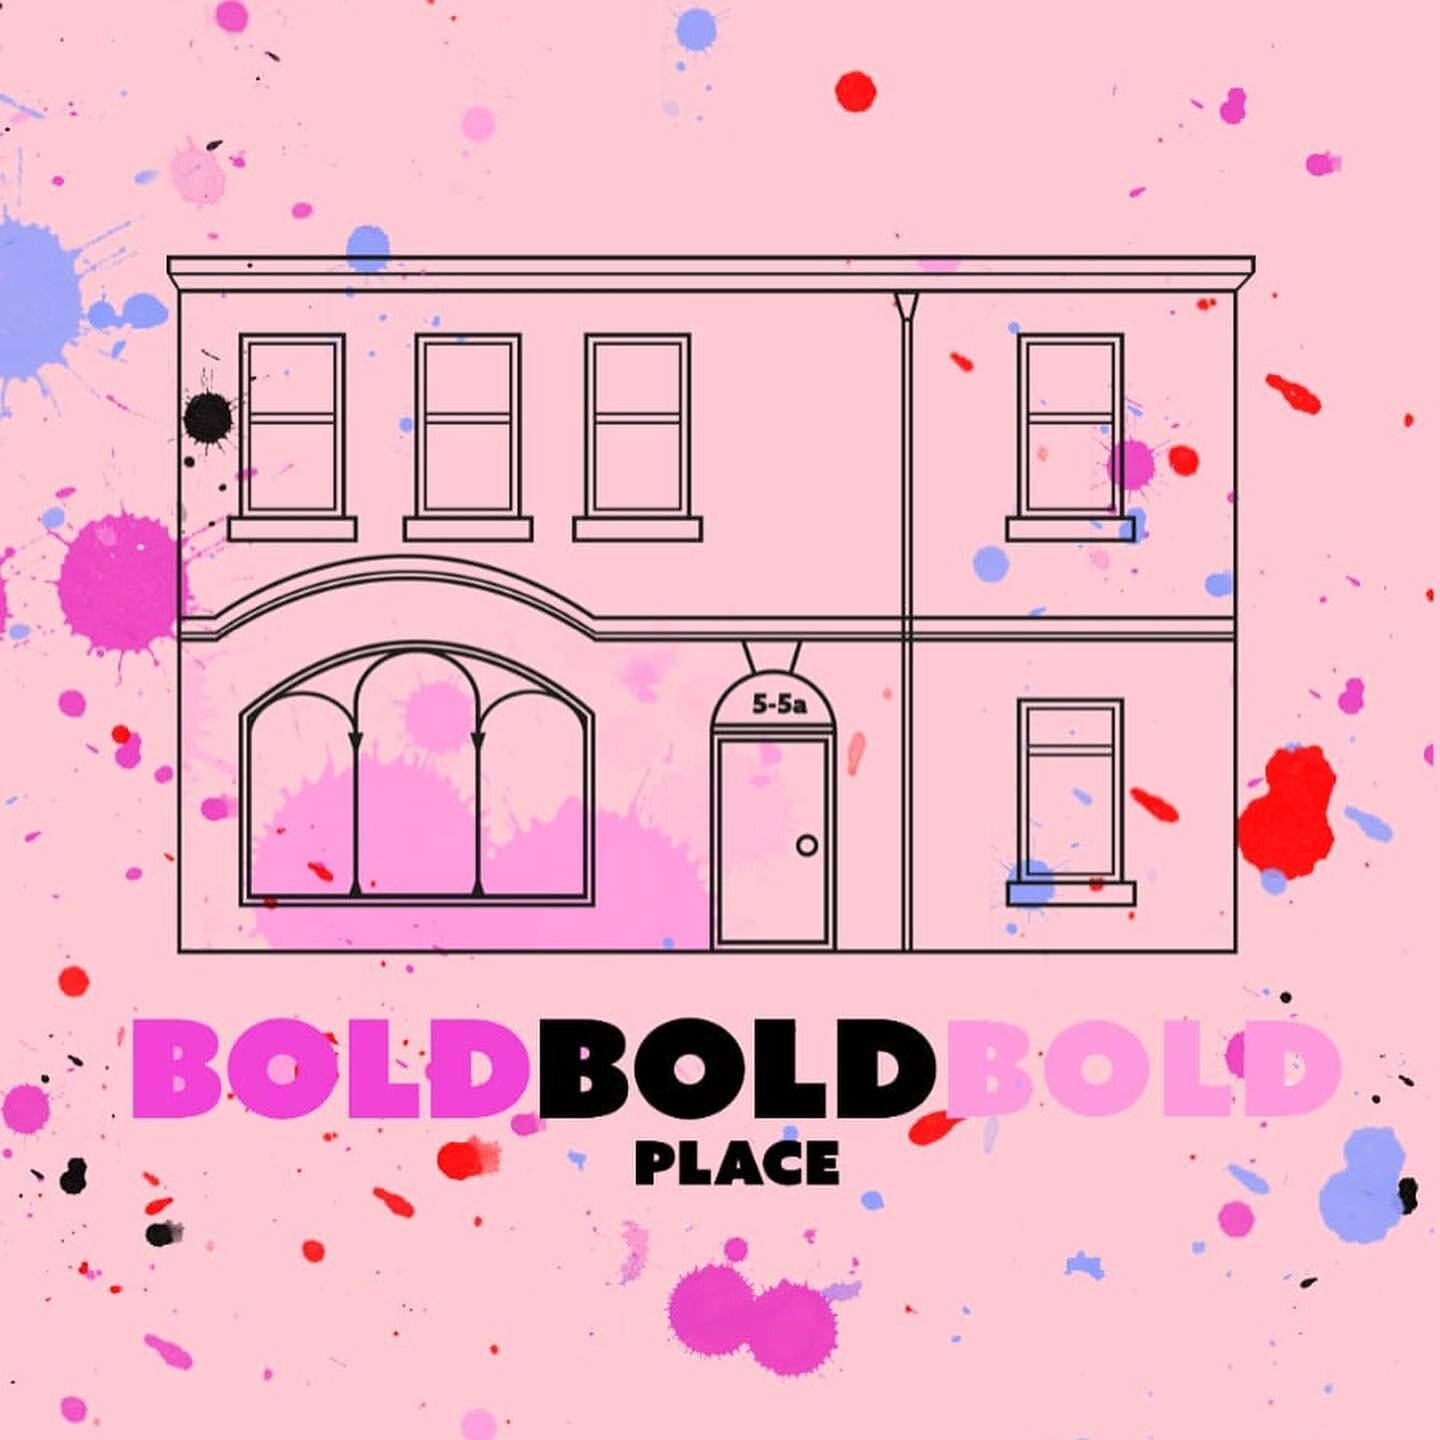 The @boldplacelvpl Crowdfunder is now live! You can support our studio by contributing &amp; receiving rewards - including Art Prints, T-Shirts &amp; limited edition gin!

To find out more - go over to @boldplacelvpl and follow the link in bio!